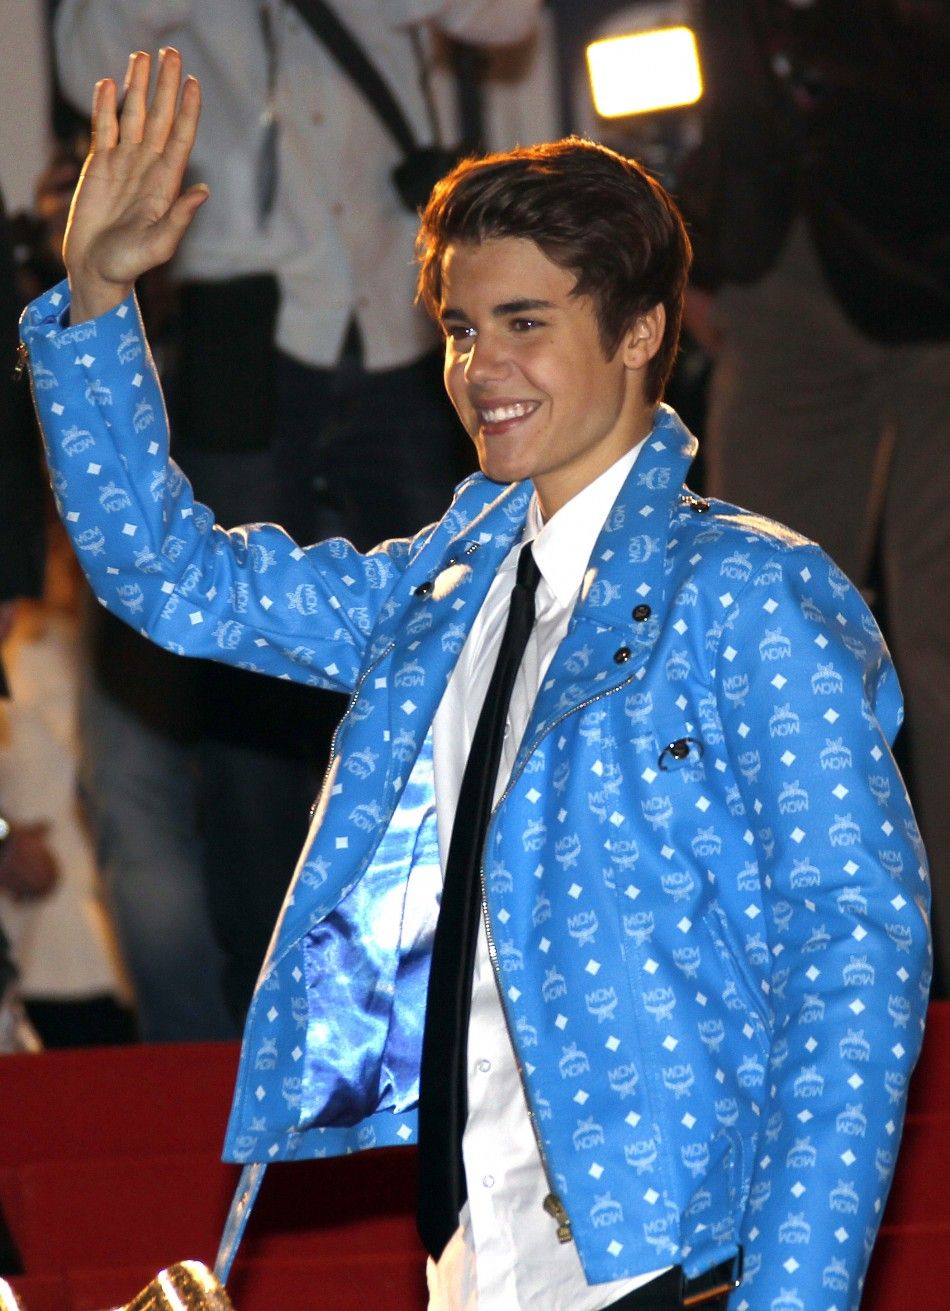 Canadian singer Justin Bieber waves as he arrives at the Cannes festival palace to attend the NRJ Music Awards in Cannes January 28, 2012.